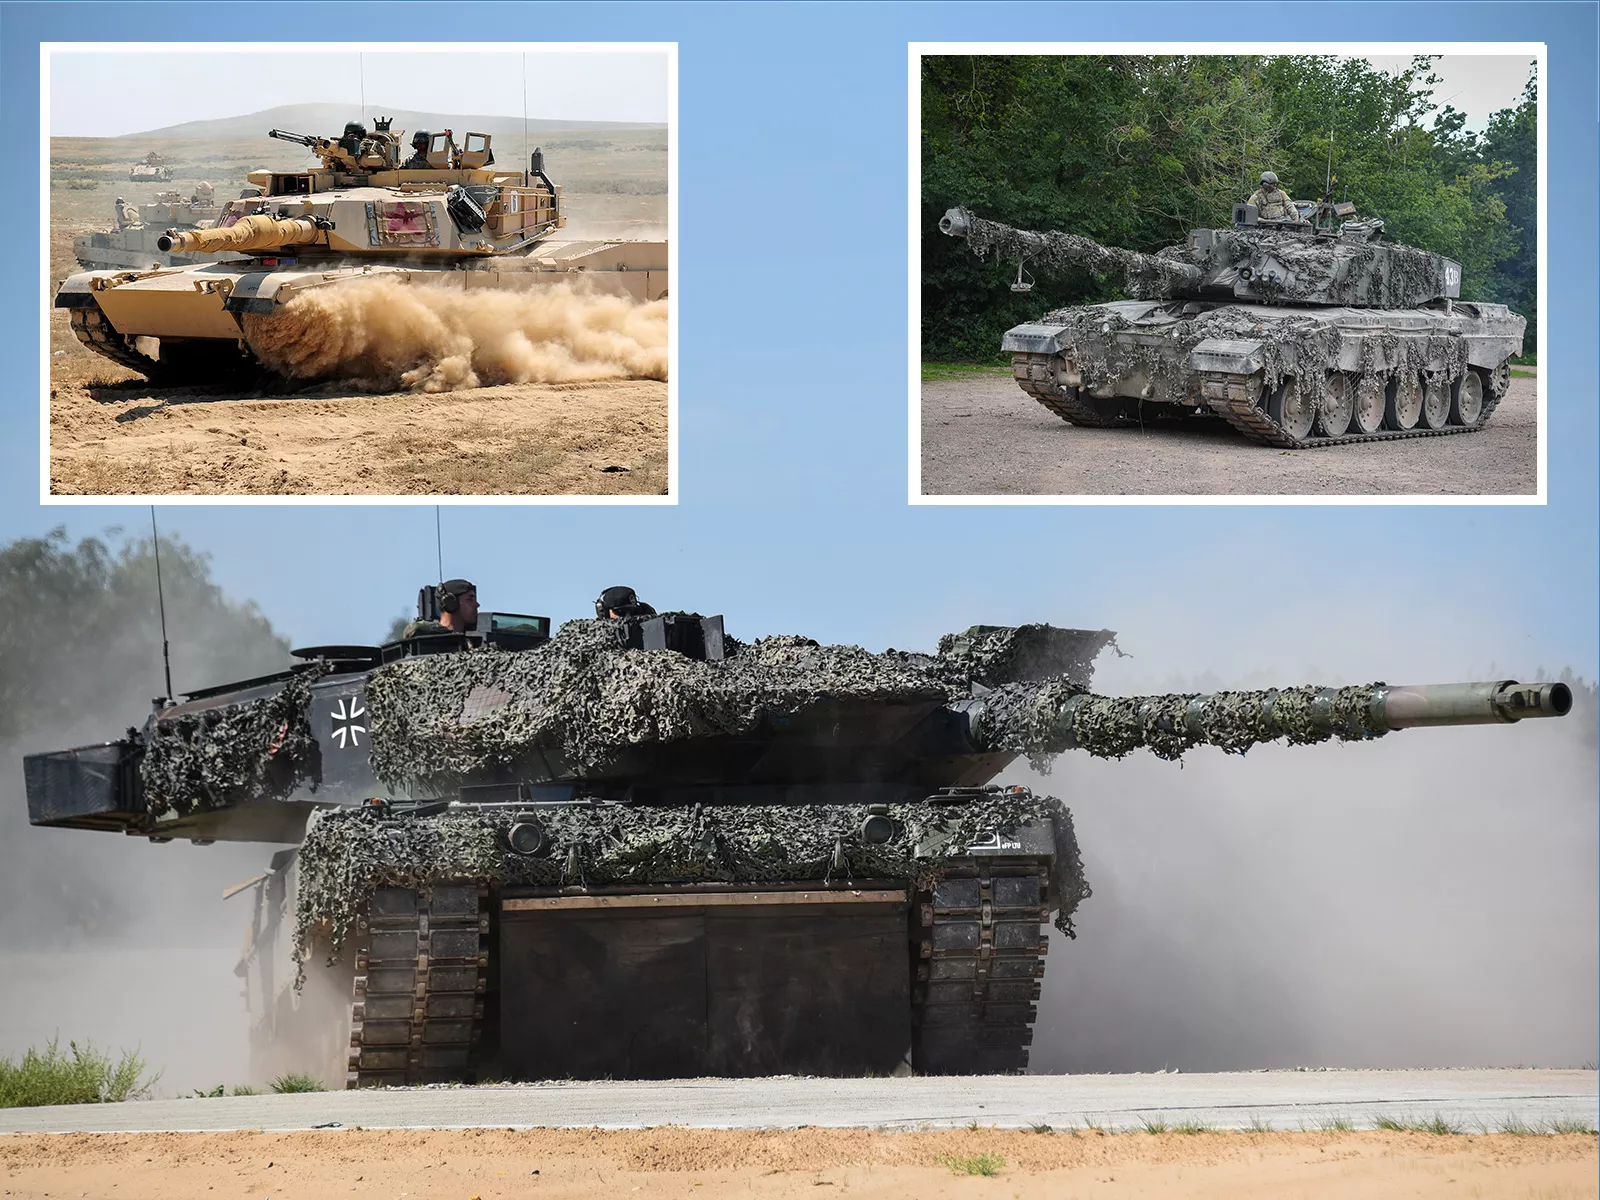 From Abrams to Leopards: The Cost of Western Tanks Being Sent to Ukraine